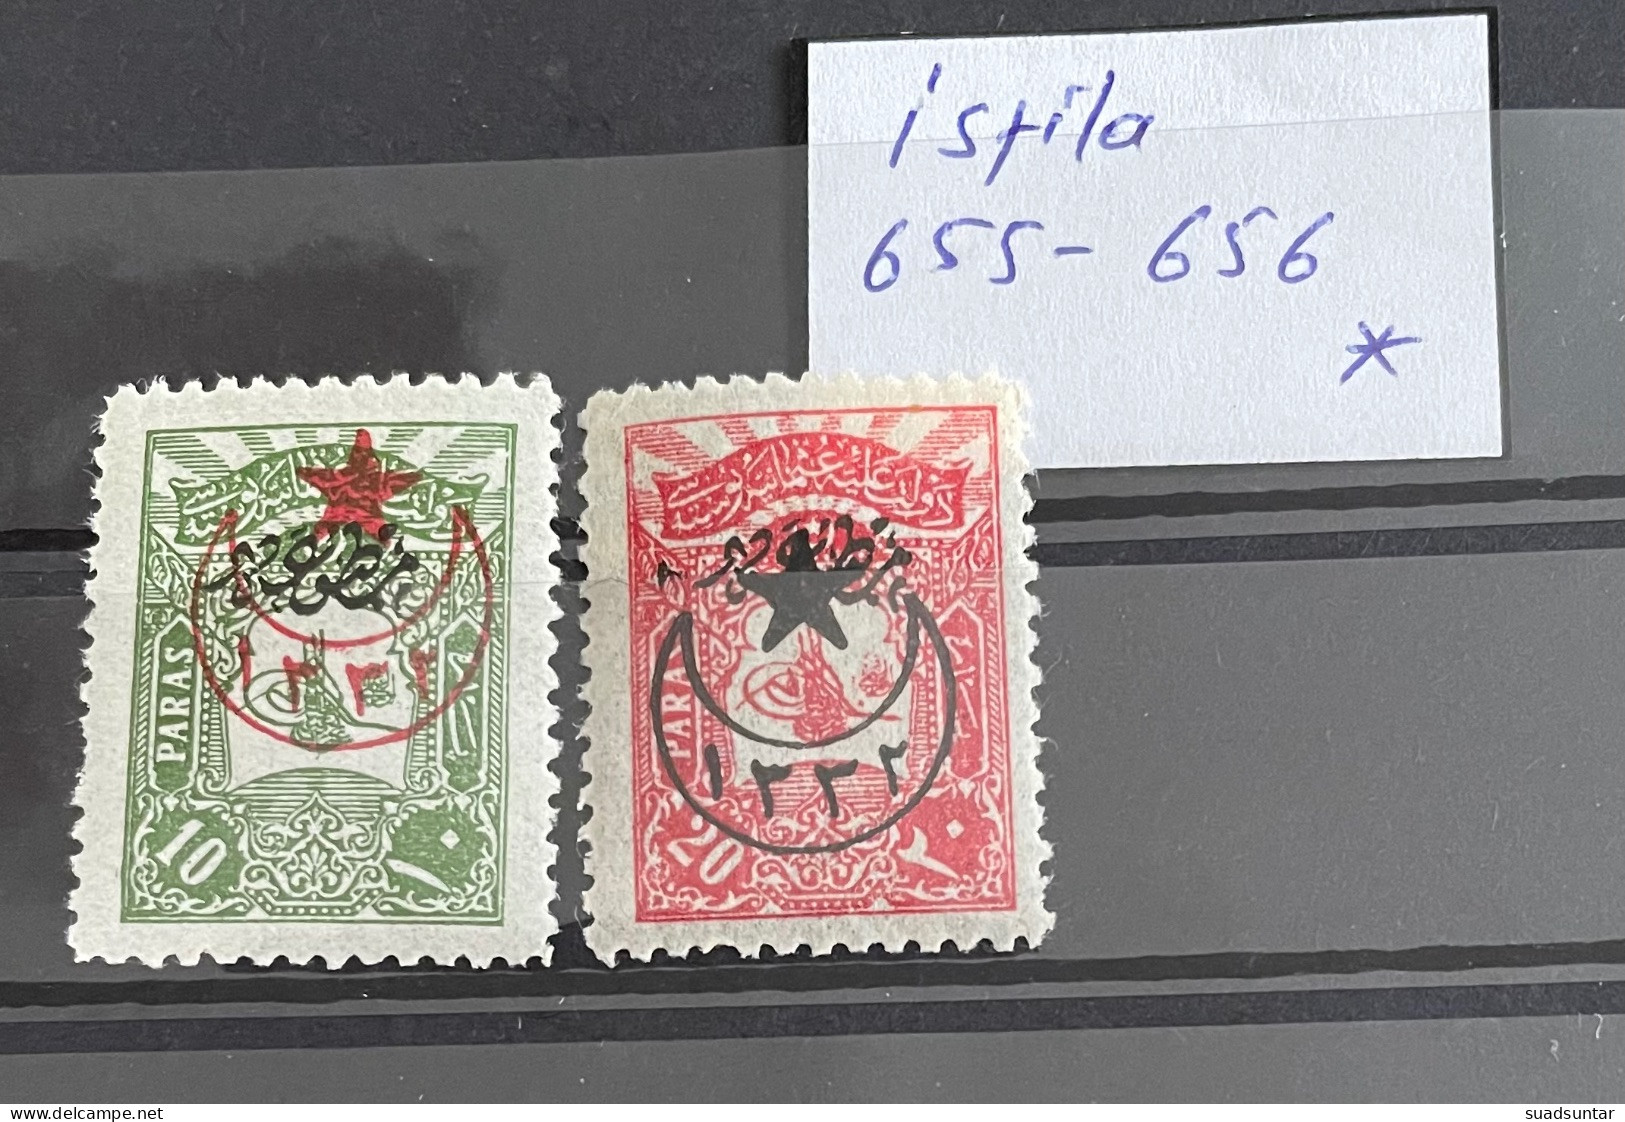 1916 5 Star Overprinted Stamps MH Isfila 655-656 High Values - Unused Stamps